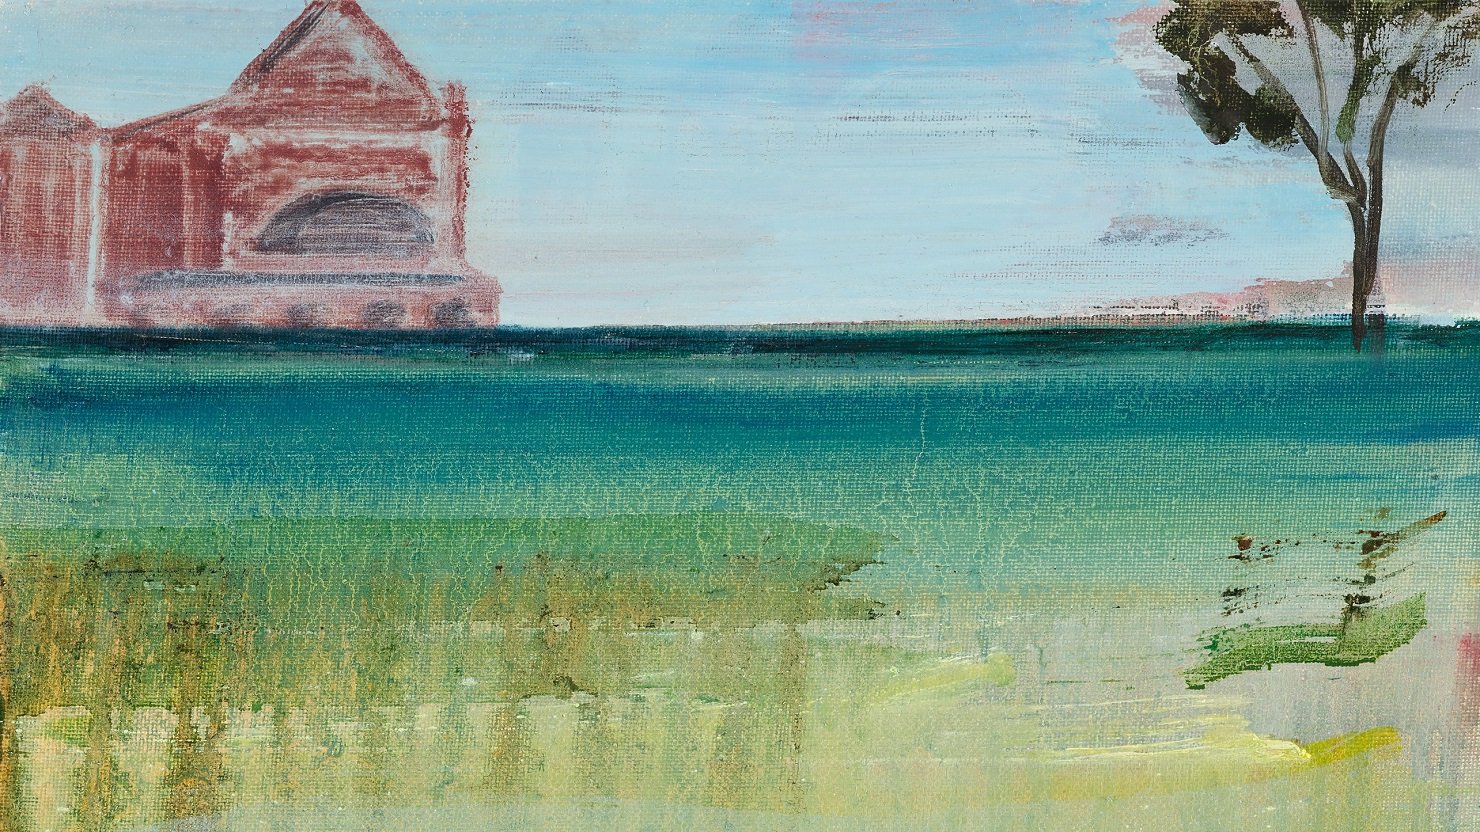 Matthew Krishanu, Church, Tree and Field, 2020 (detail). Courtesy of a Private Collection.